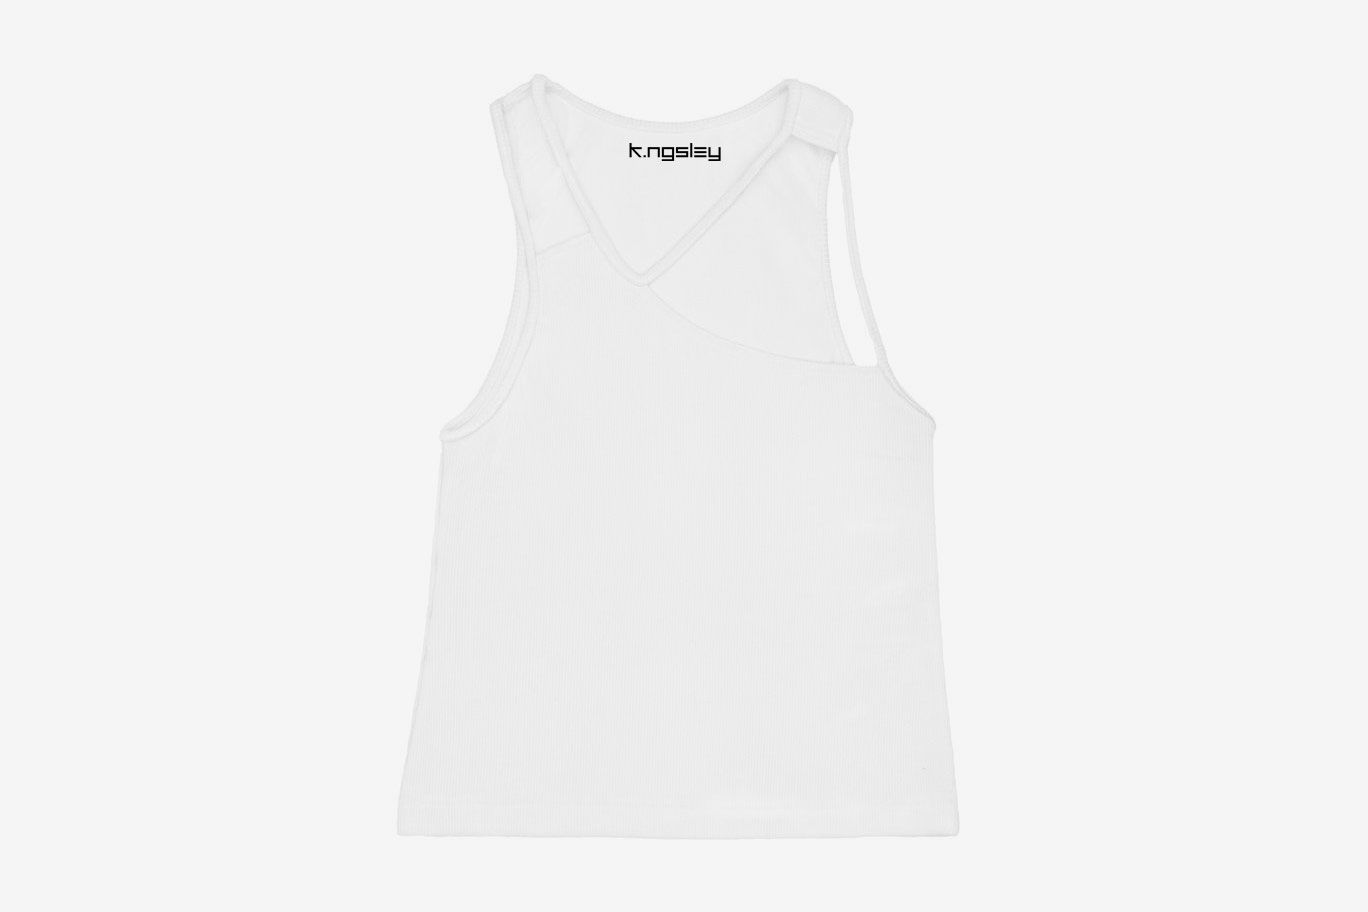 K.ngsley Makes Tank Tops for Black, Queer & Trans Bodies